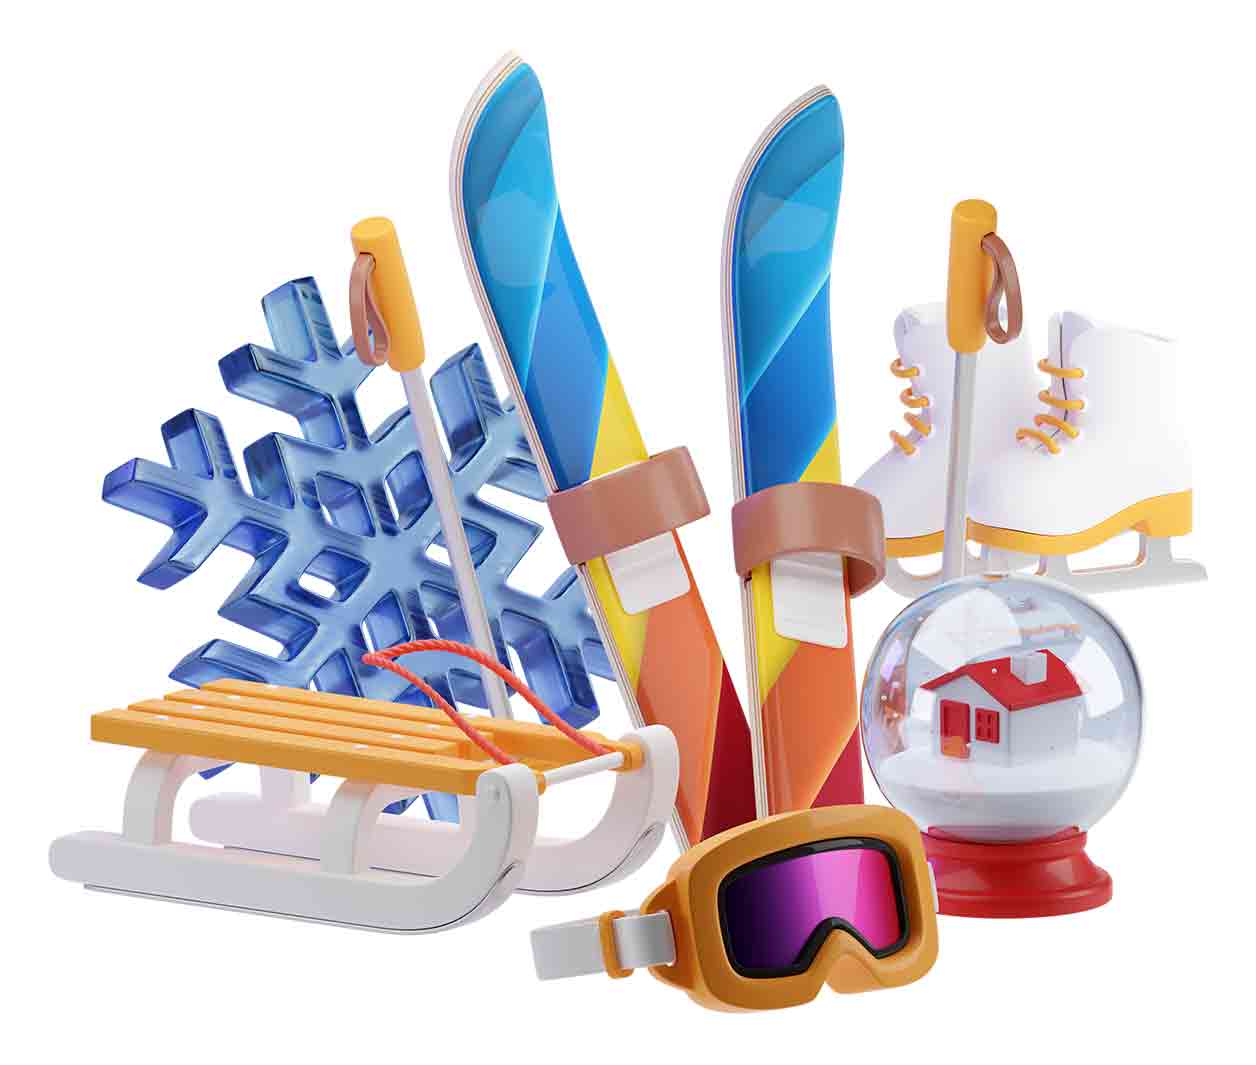 3D icons winter related theme - All you need to get ready for cold season =) Blender, PNG source files.